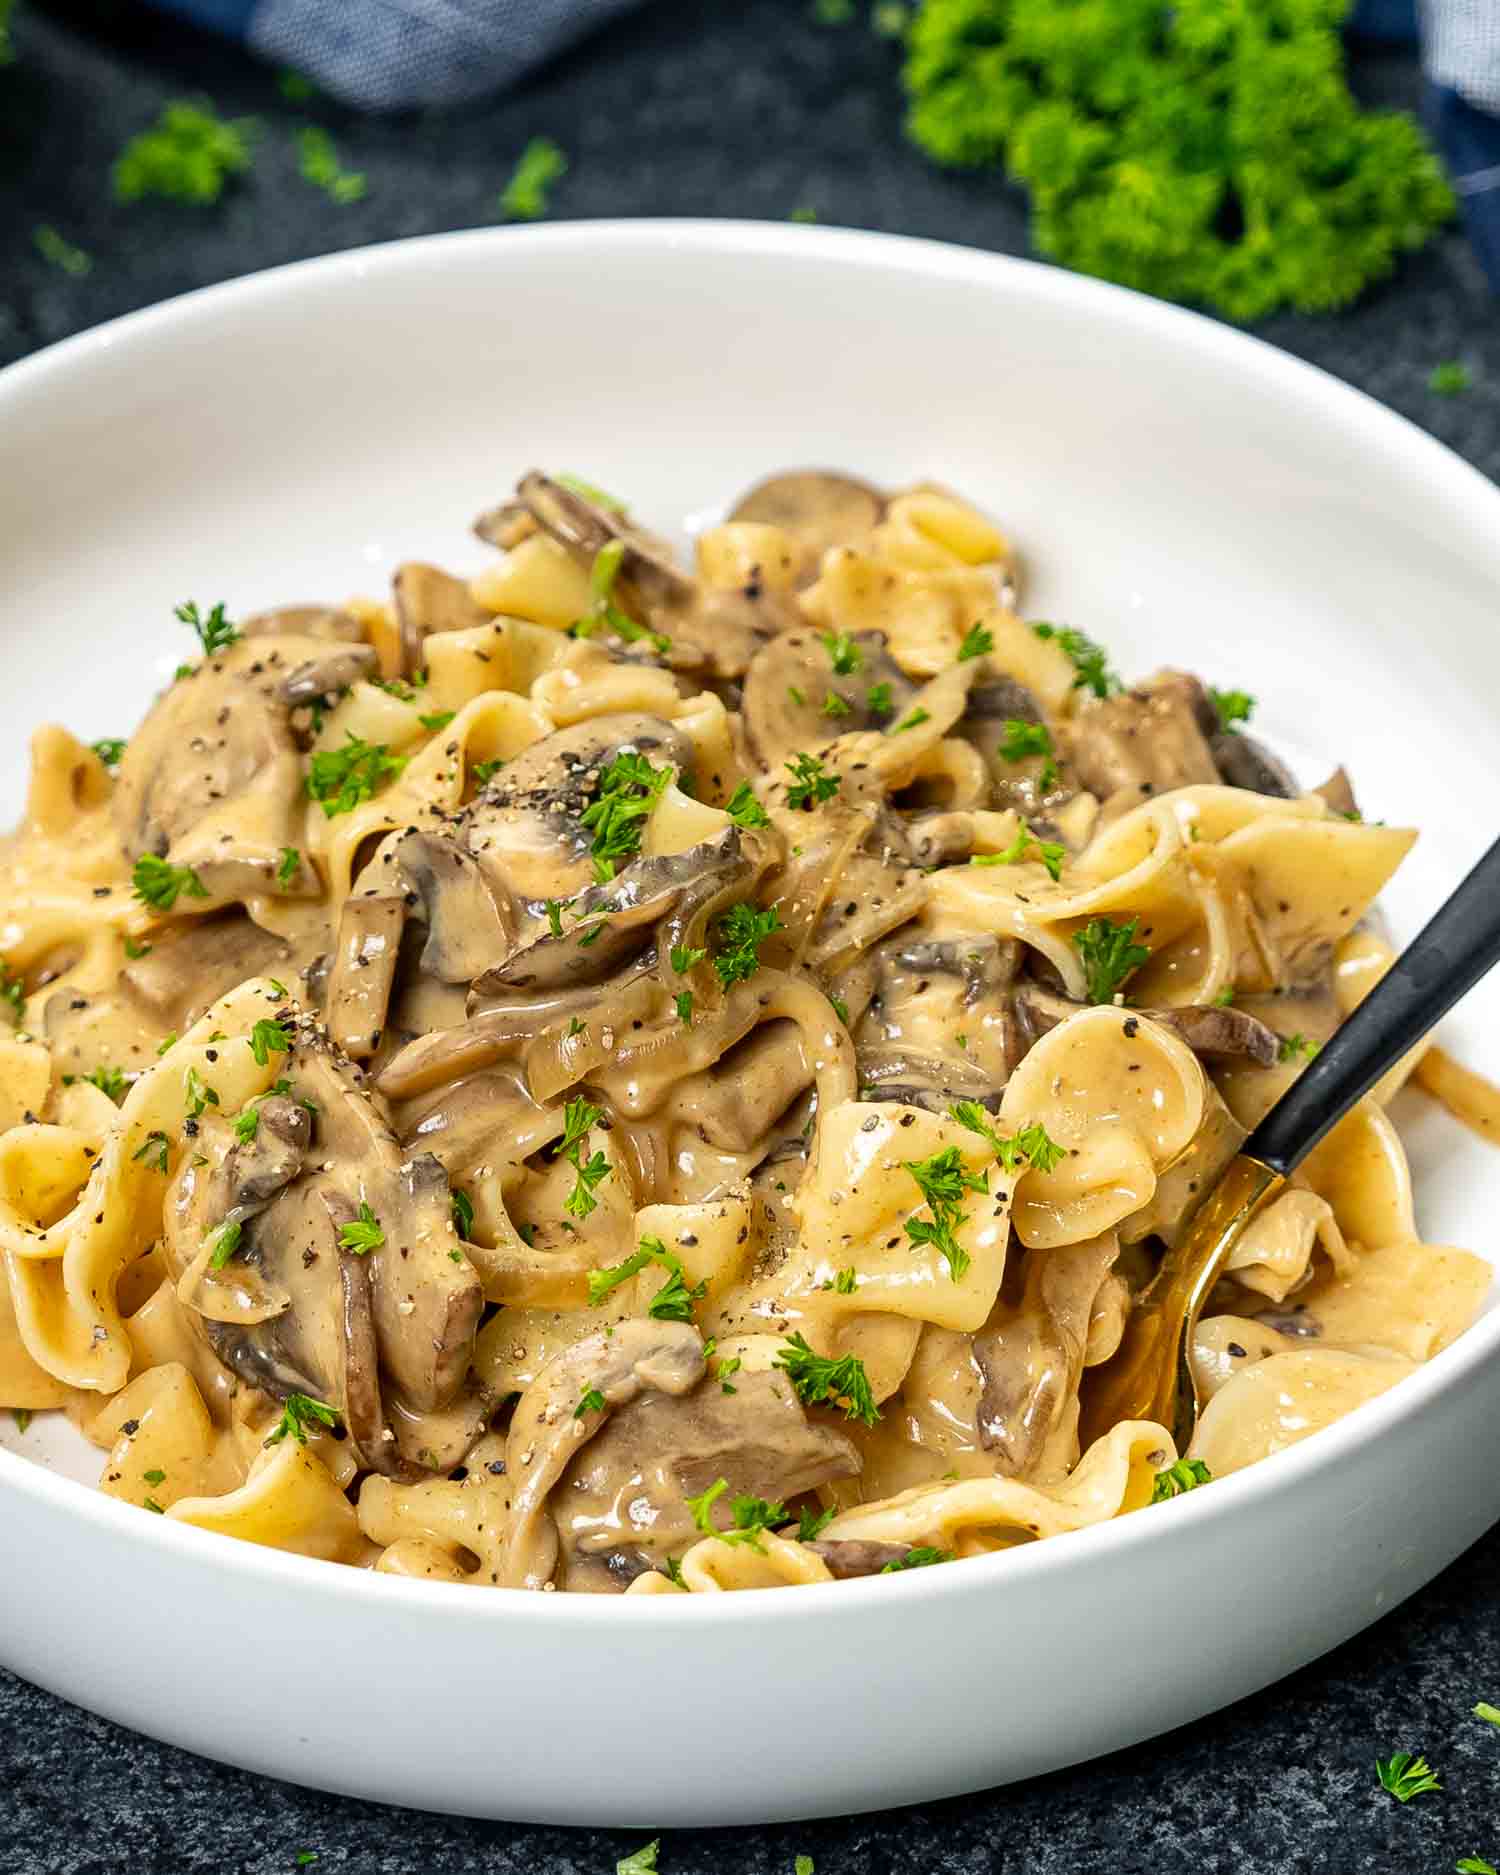 a serving of mushroom stroganoff in a white bowl garnished with parsley.